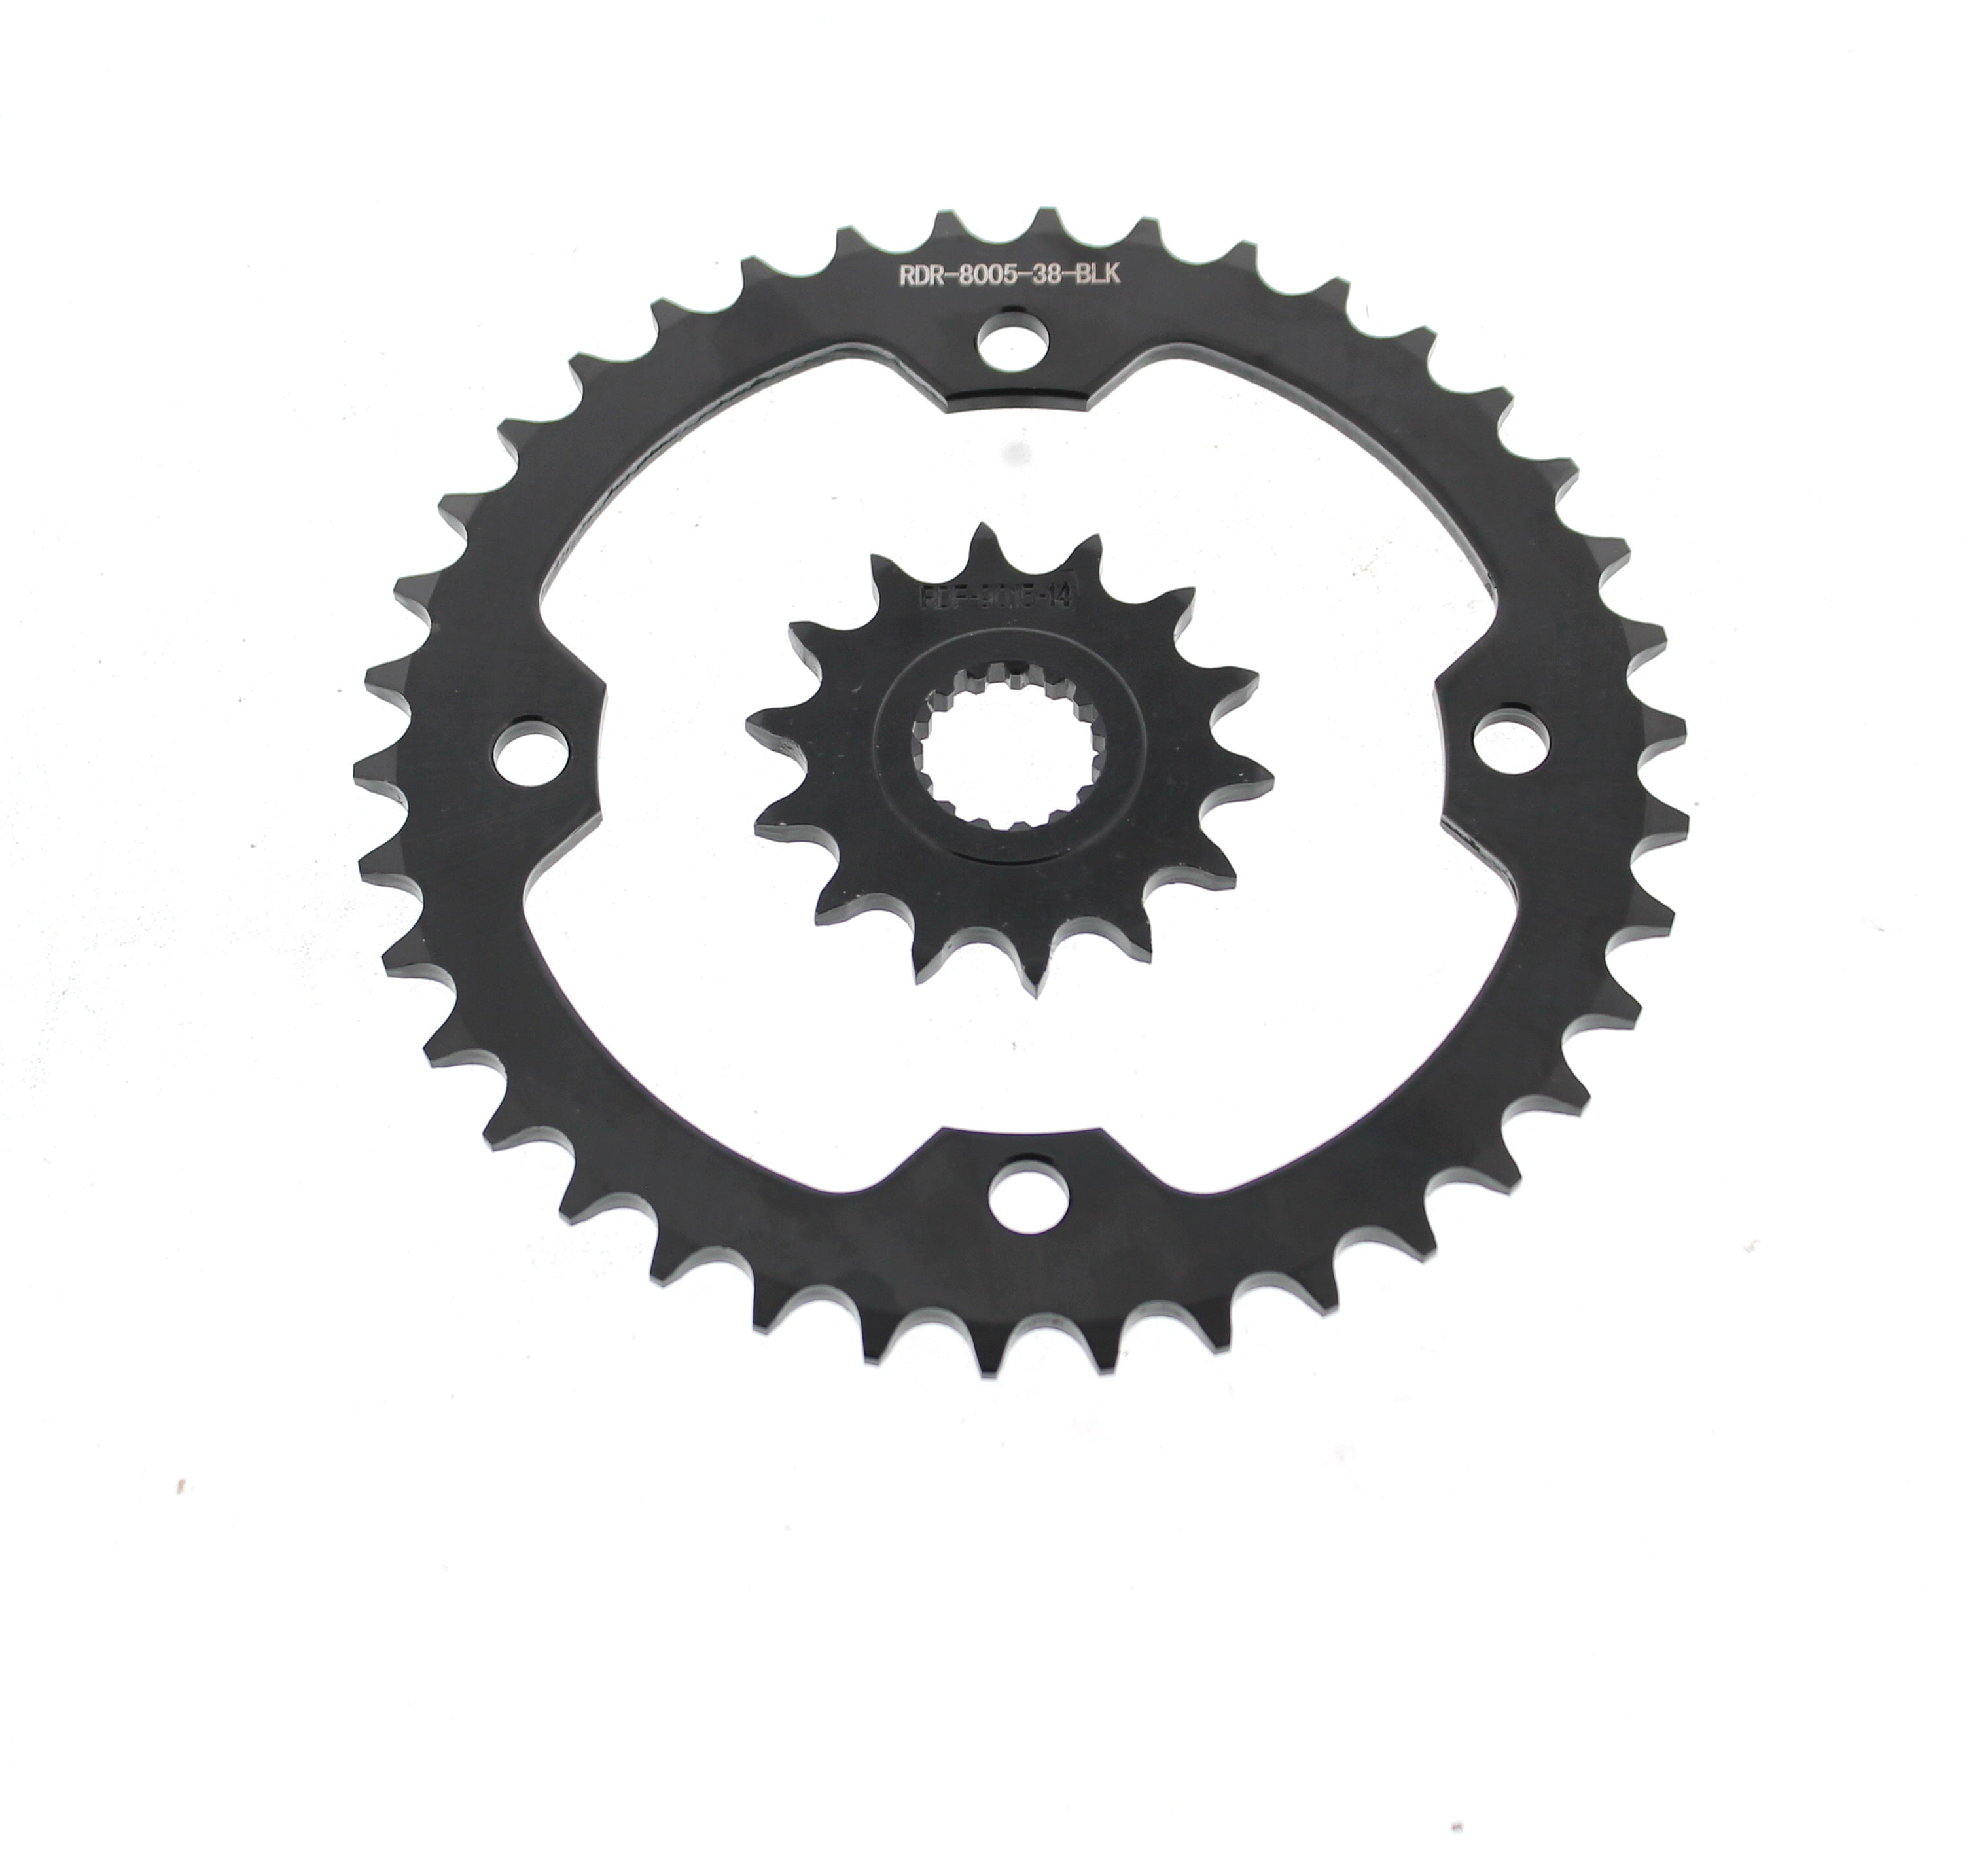 Primary Drive Rear Steel Sprocket 36 Tooth for Yamaha YFZ 450 2004-2009